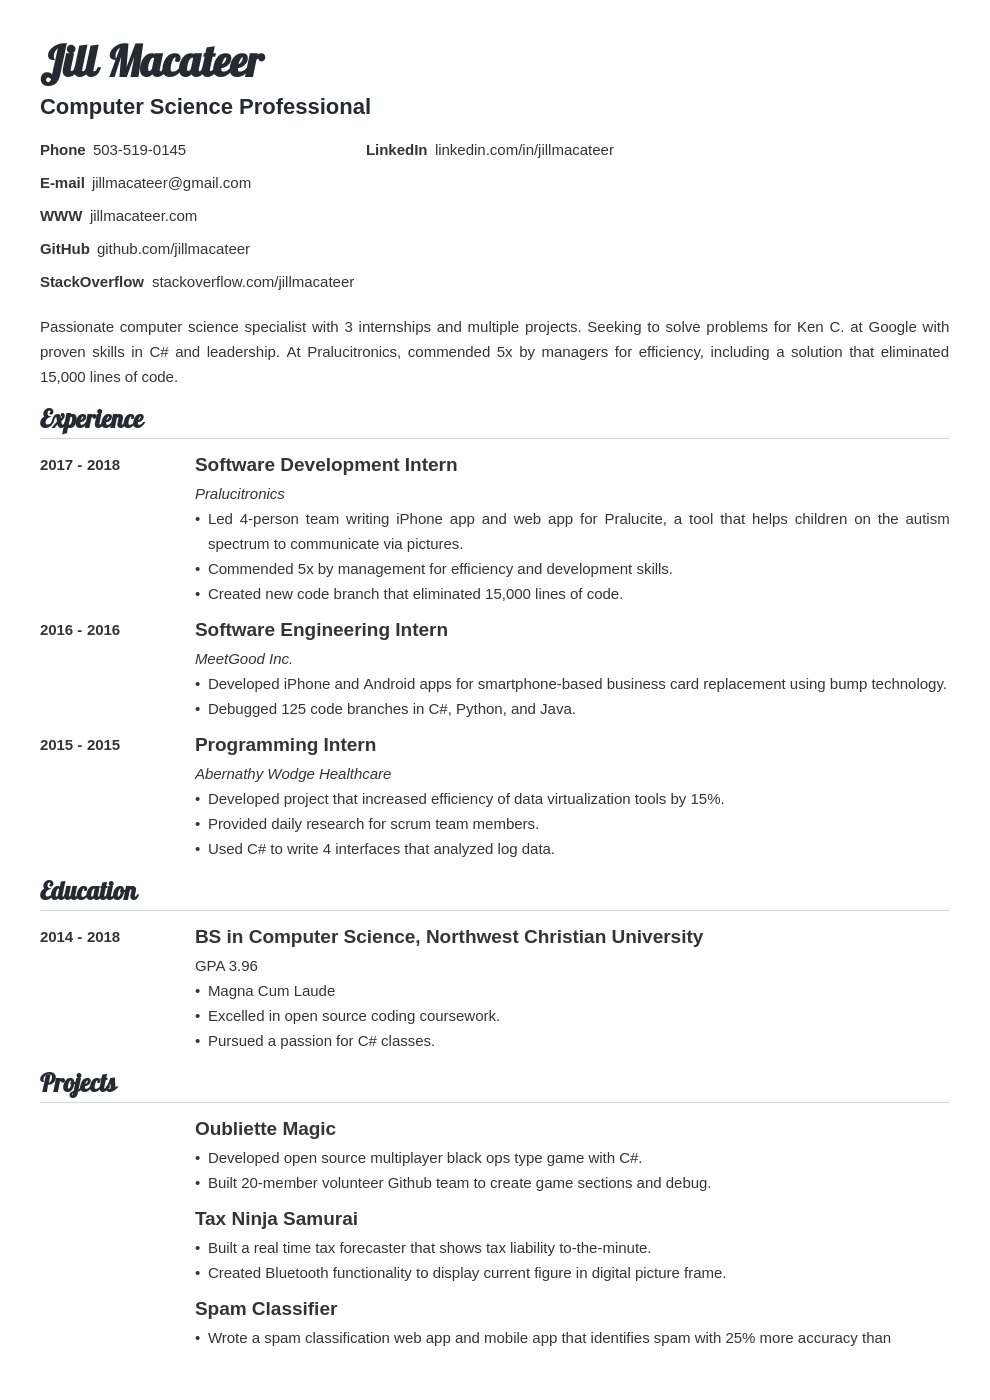 Additional coursework on resume computer science